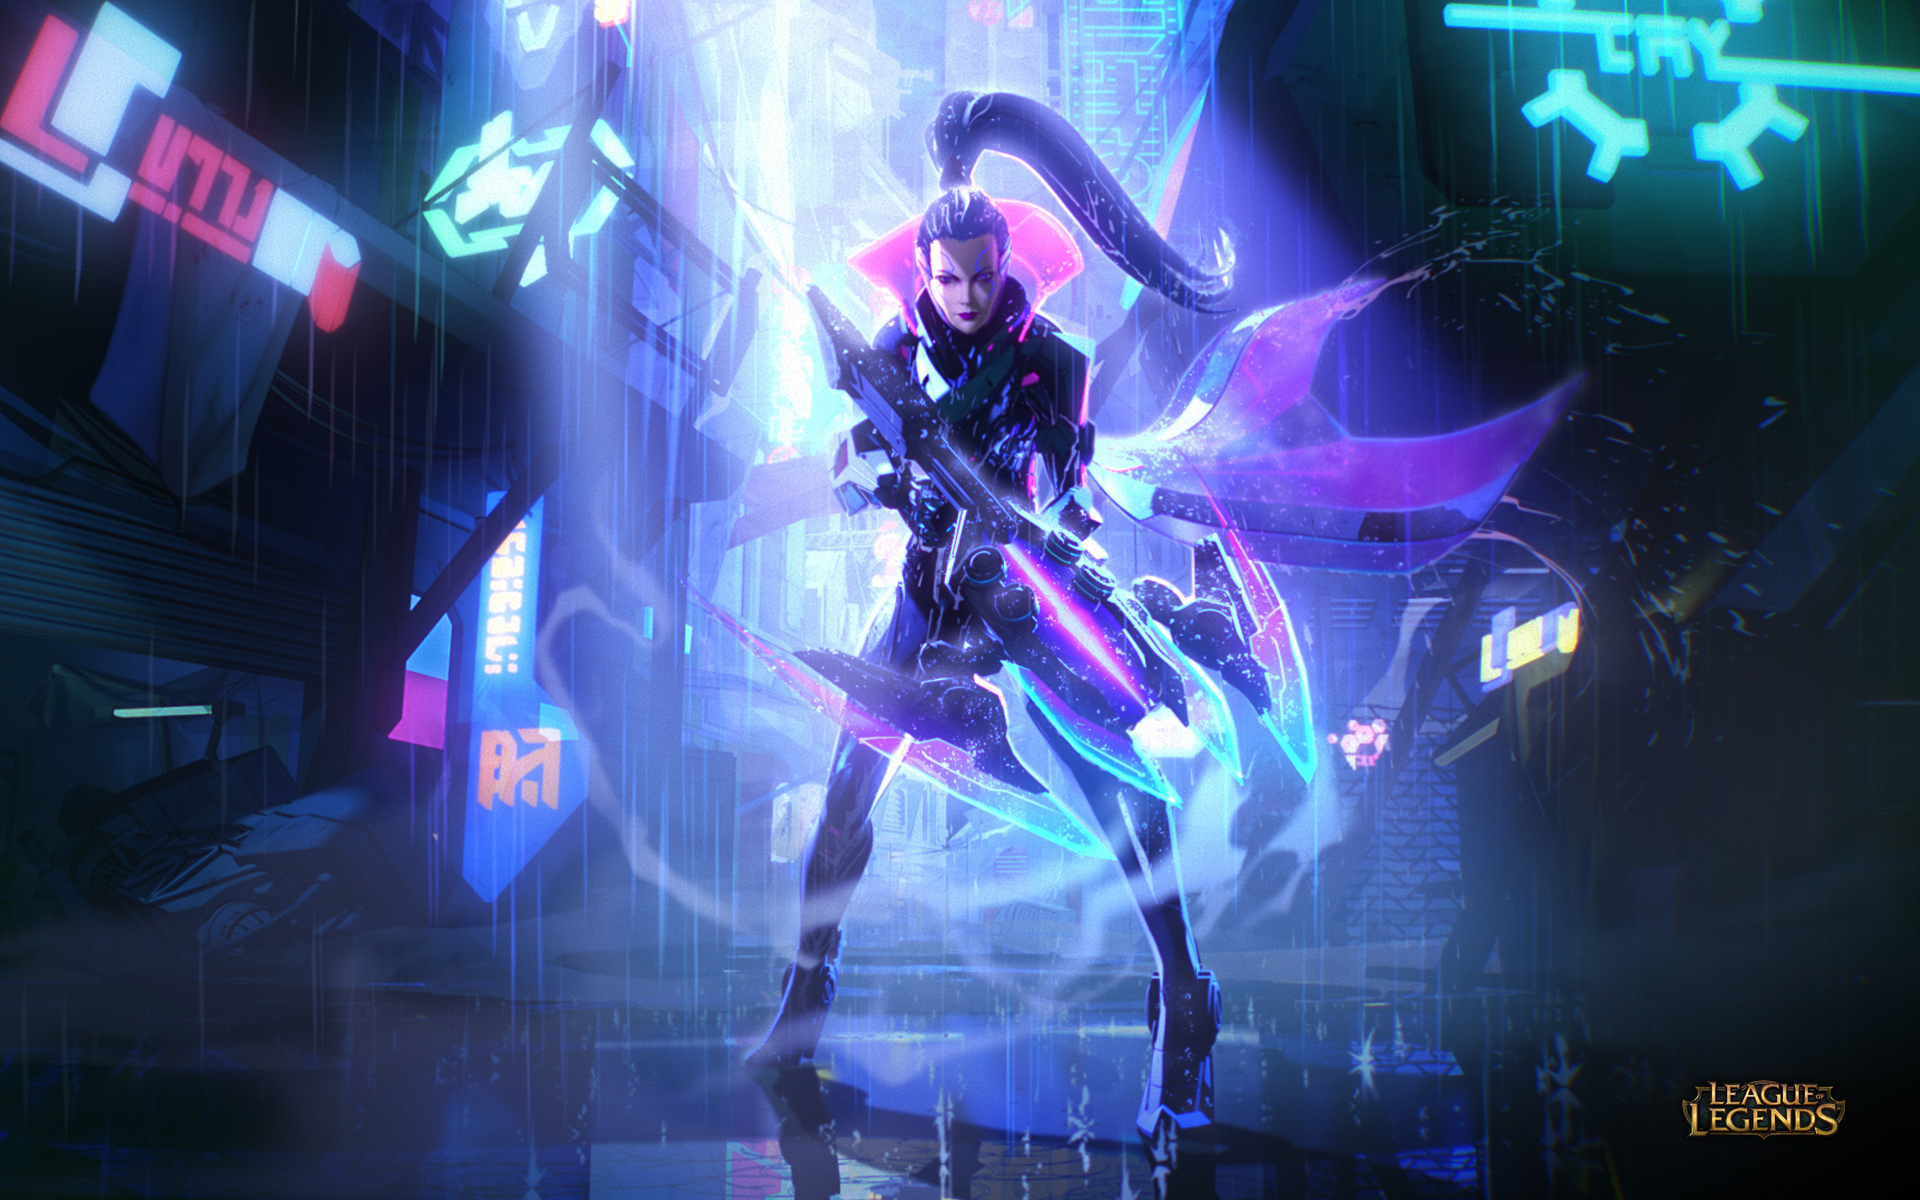 League Of Legends Summoners Rift Project Skins Vayne League Of Legends Vayne Video Games Video Game  1920x1200